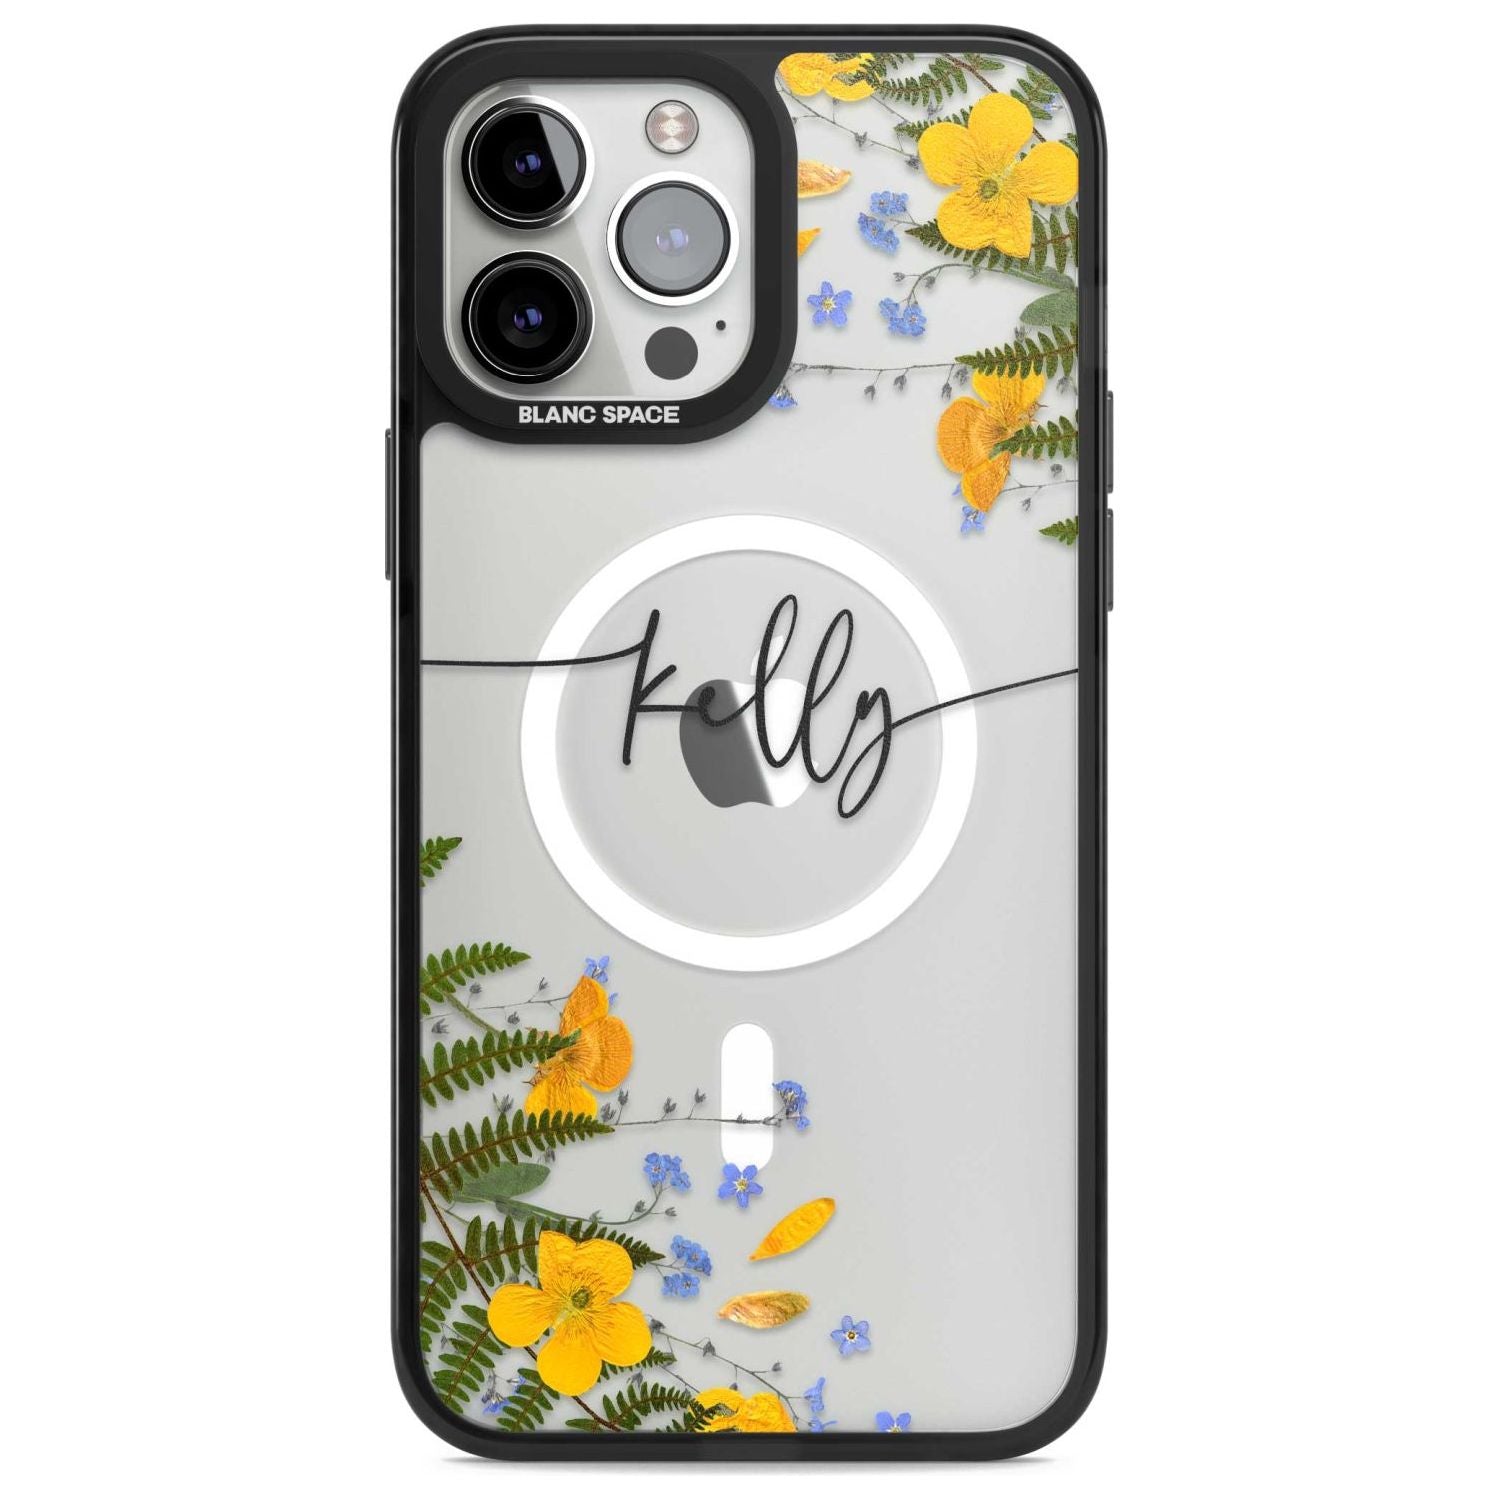 Personalised Ferns & Wildflowers Custom Phone Case iPhone 13 Pro Max / Magsafe Black Impact Case Blanc Space